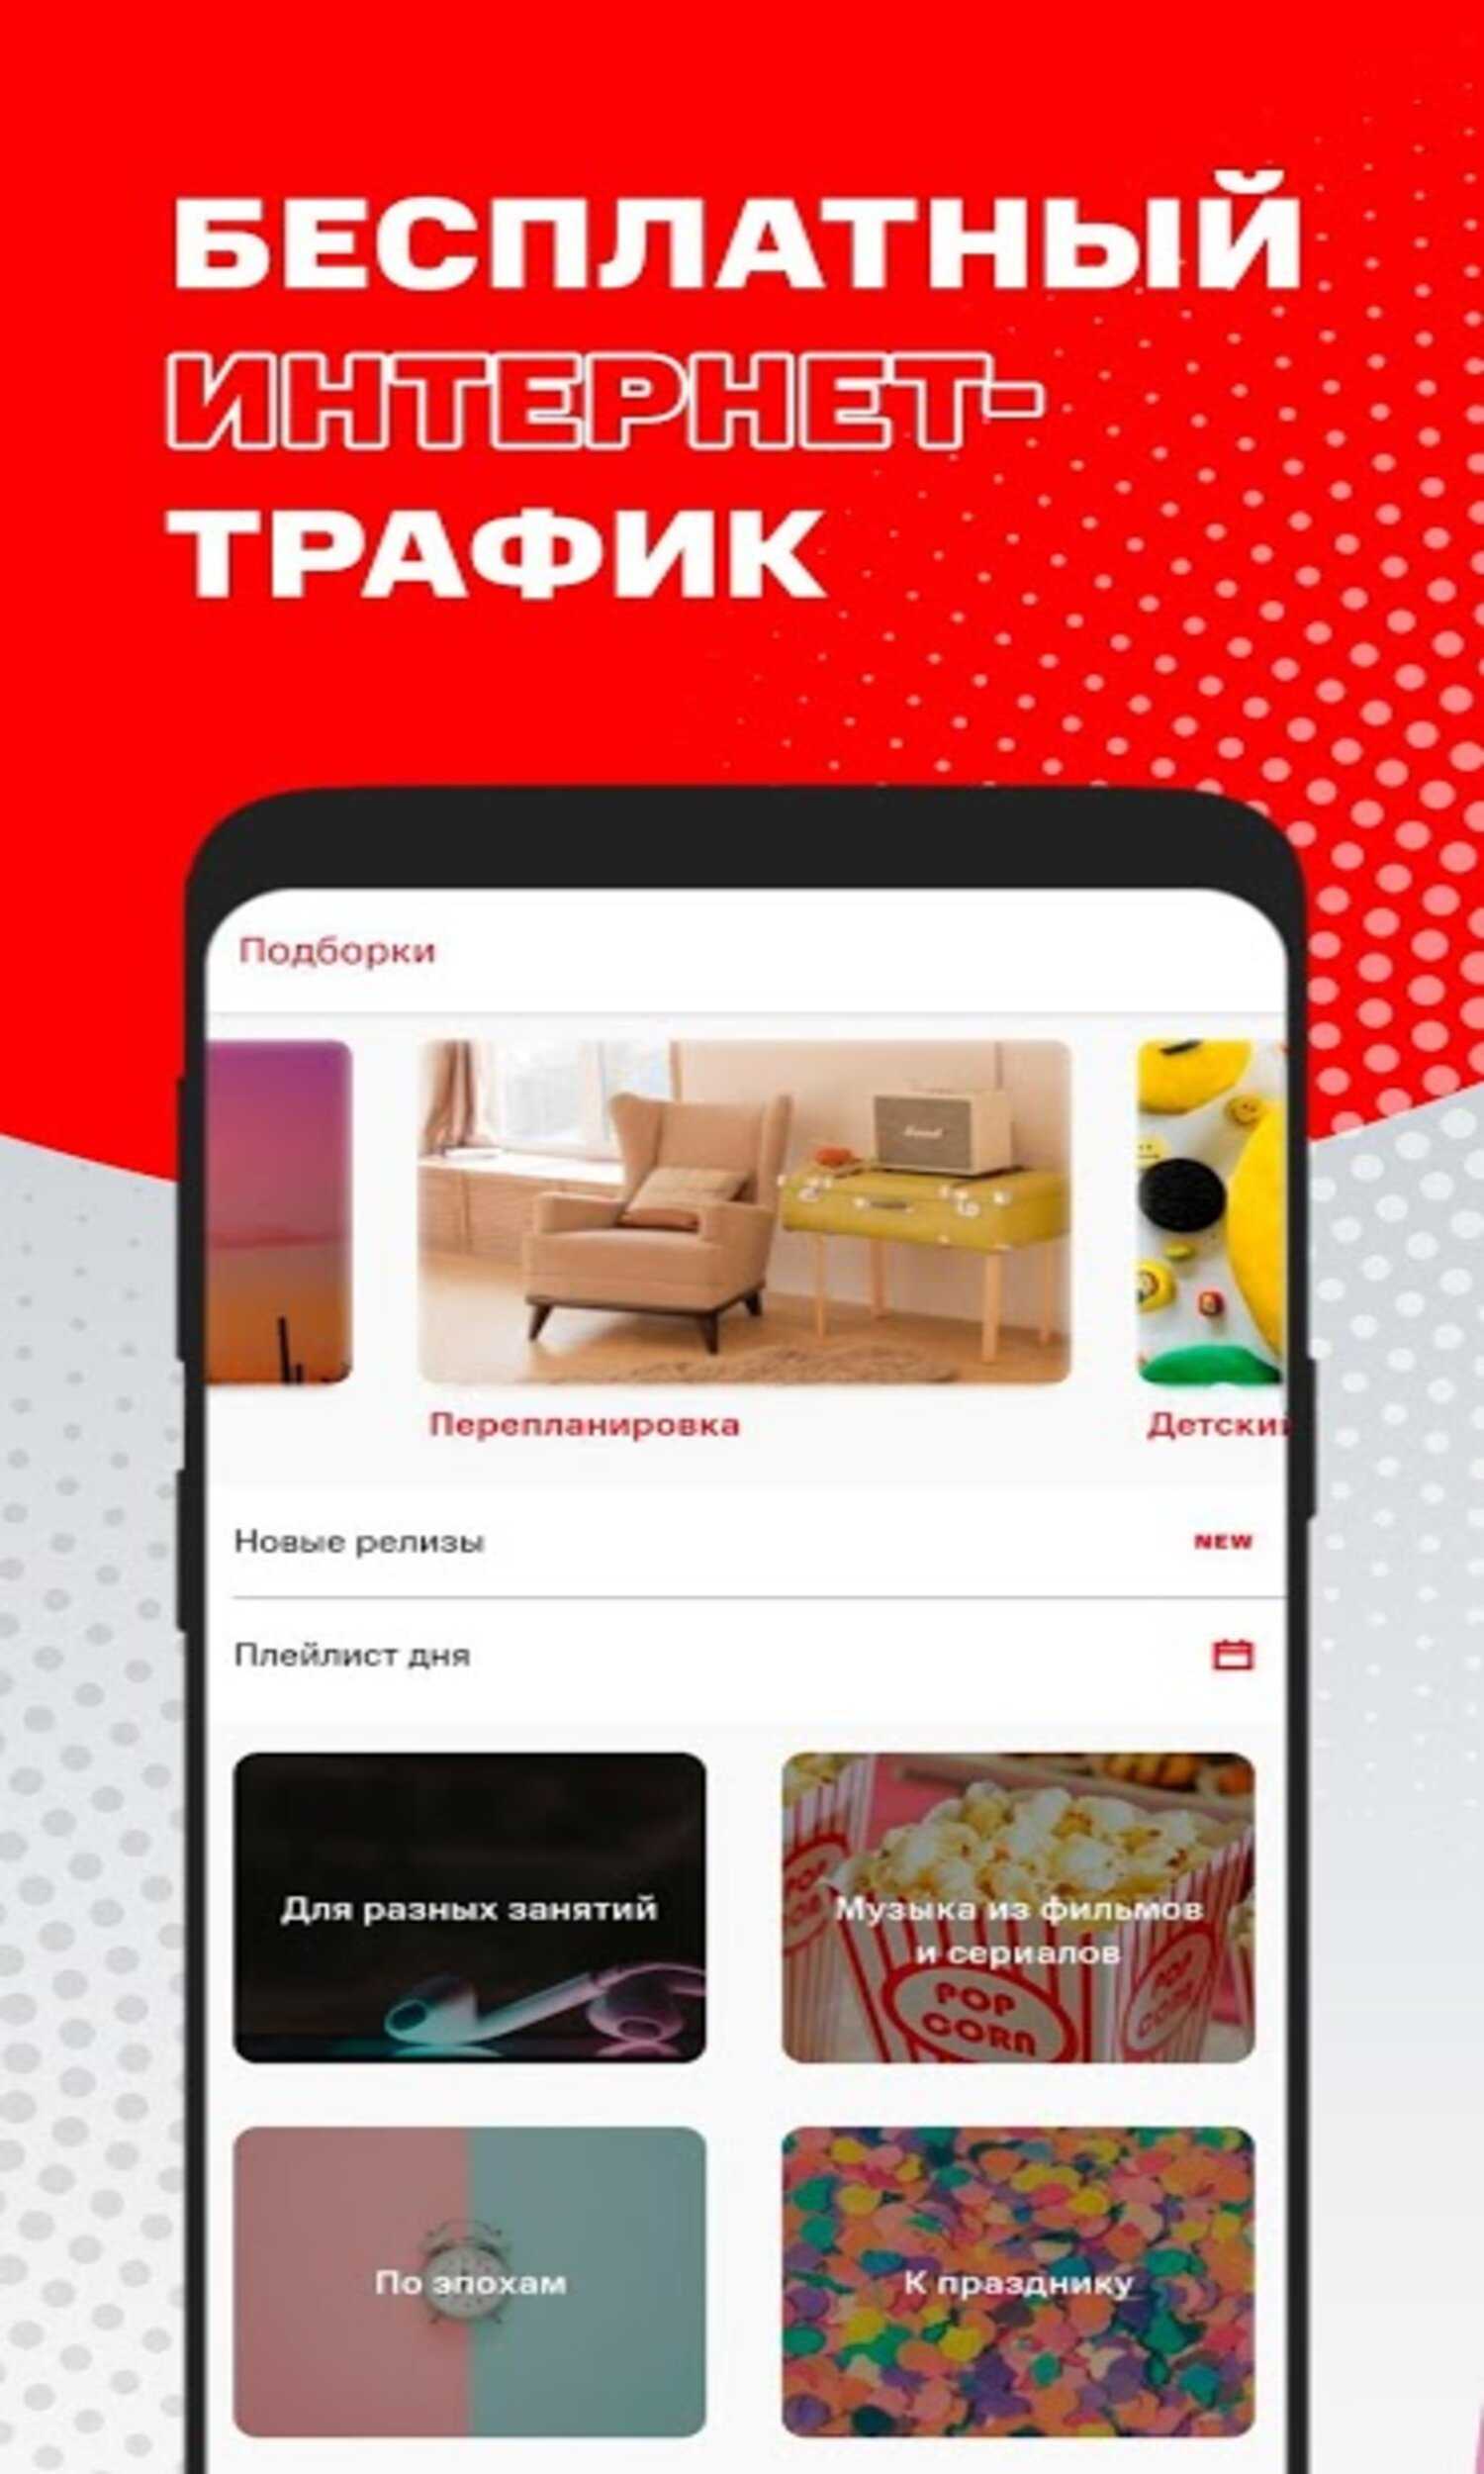 МТС Music v7.4 (Subscribed) Apk